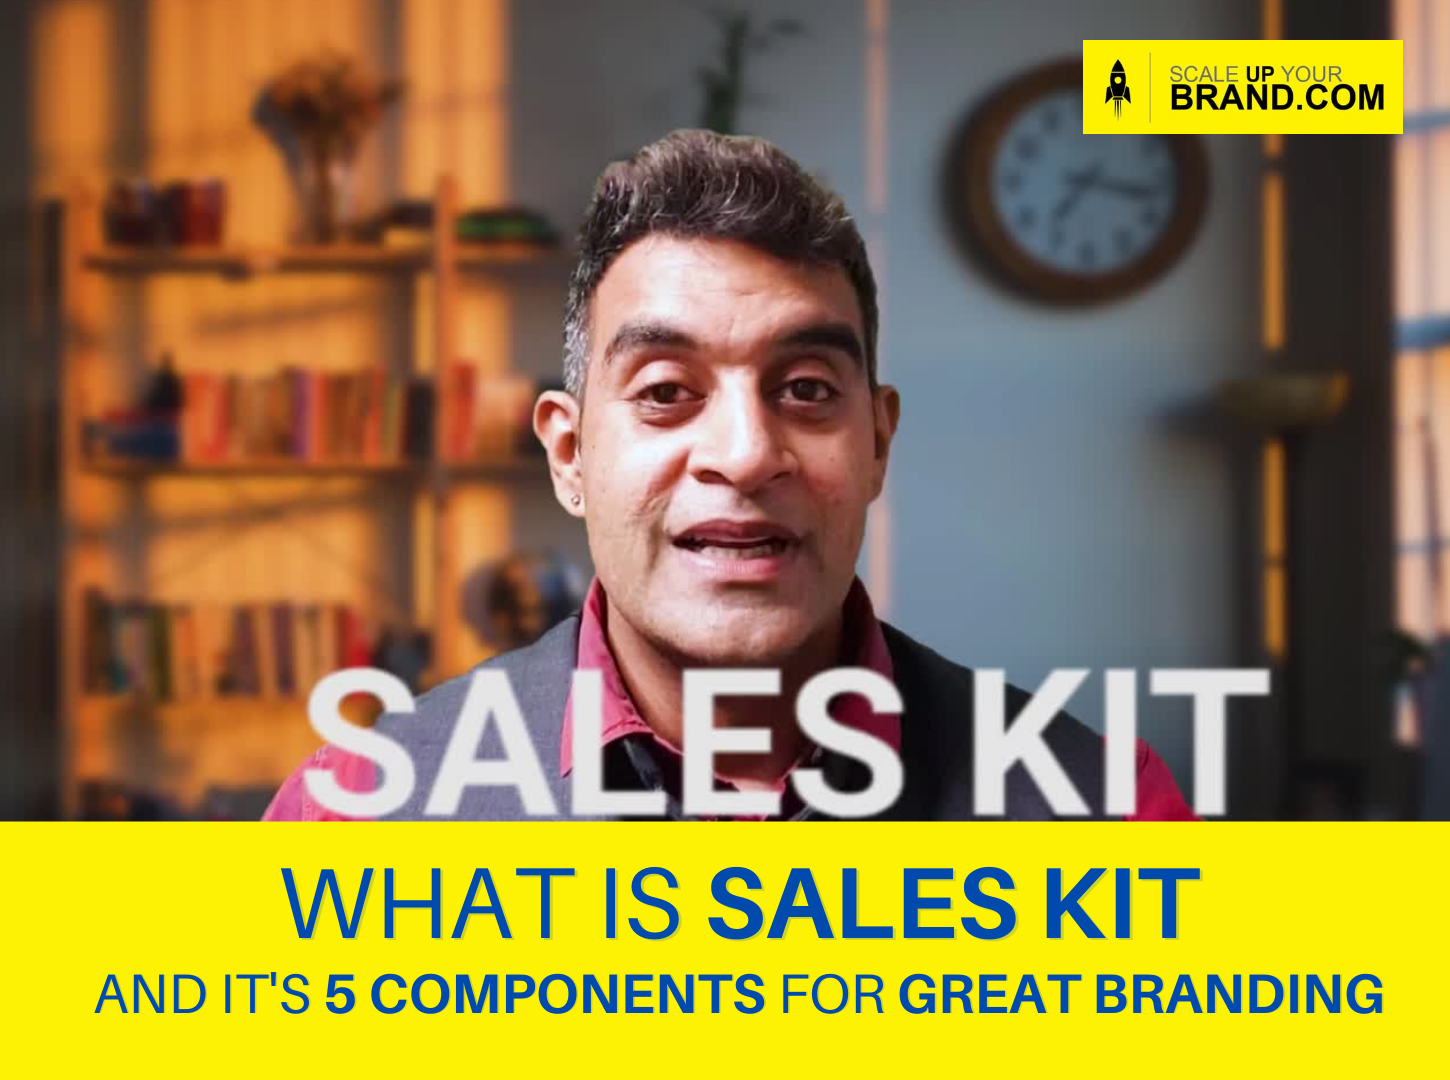 What is Sales Kit | Scale Up Your Brand